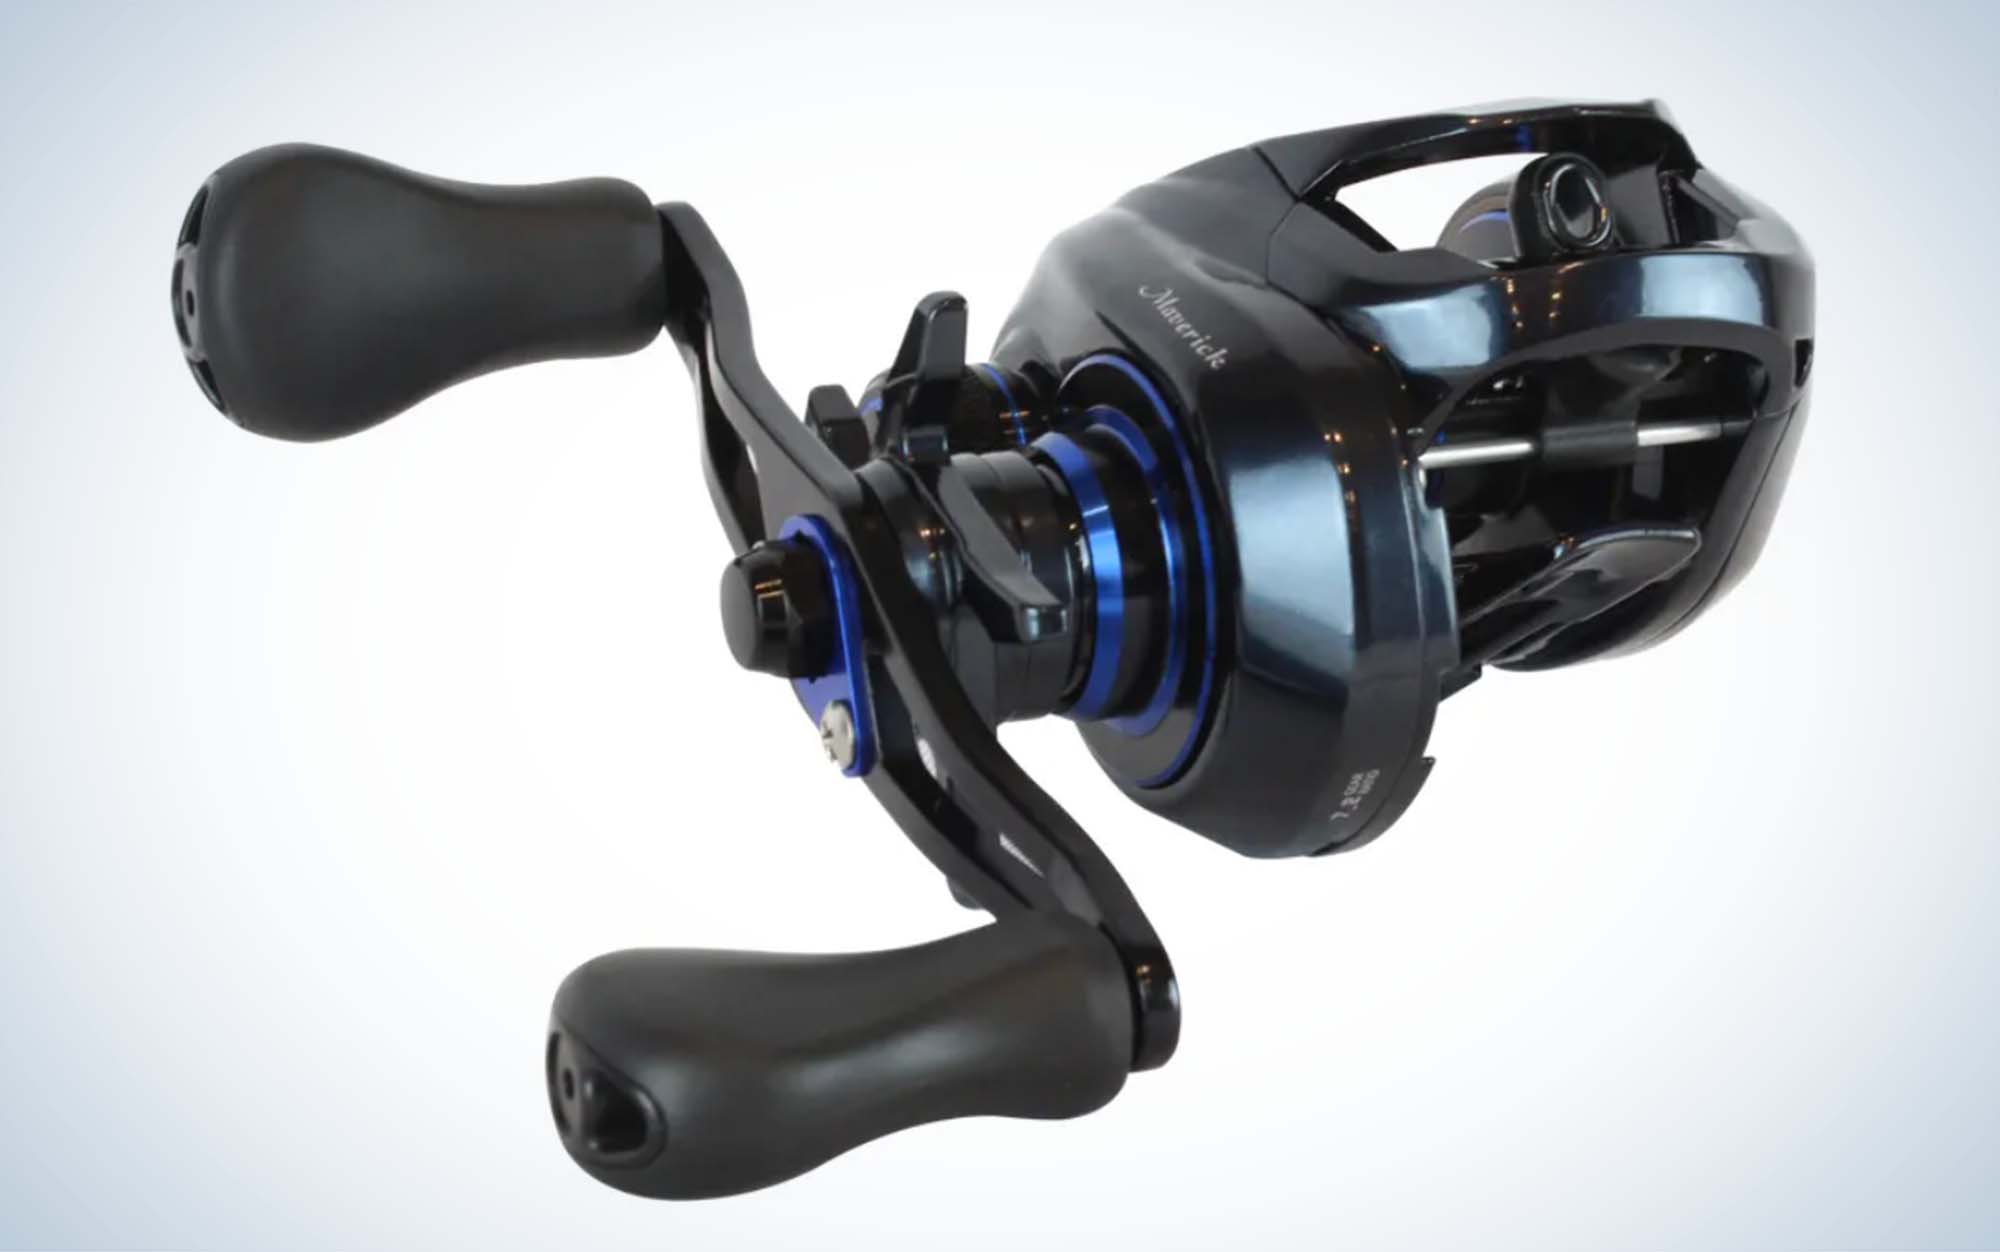 Best Baitcasting Reel Under 100 – Popular Products Reviewed! 